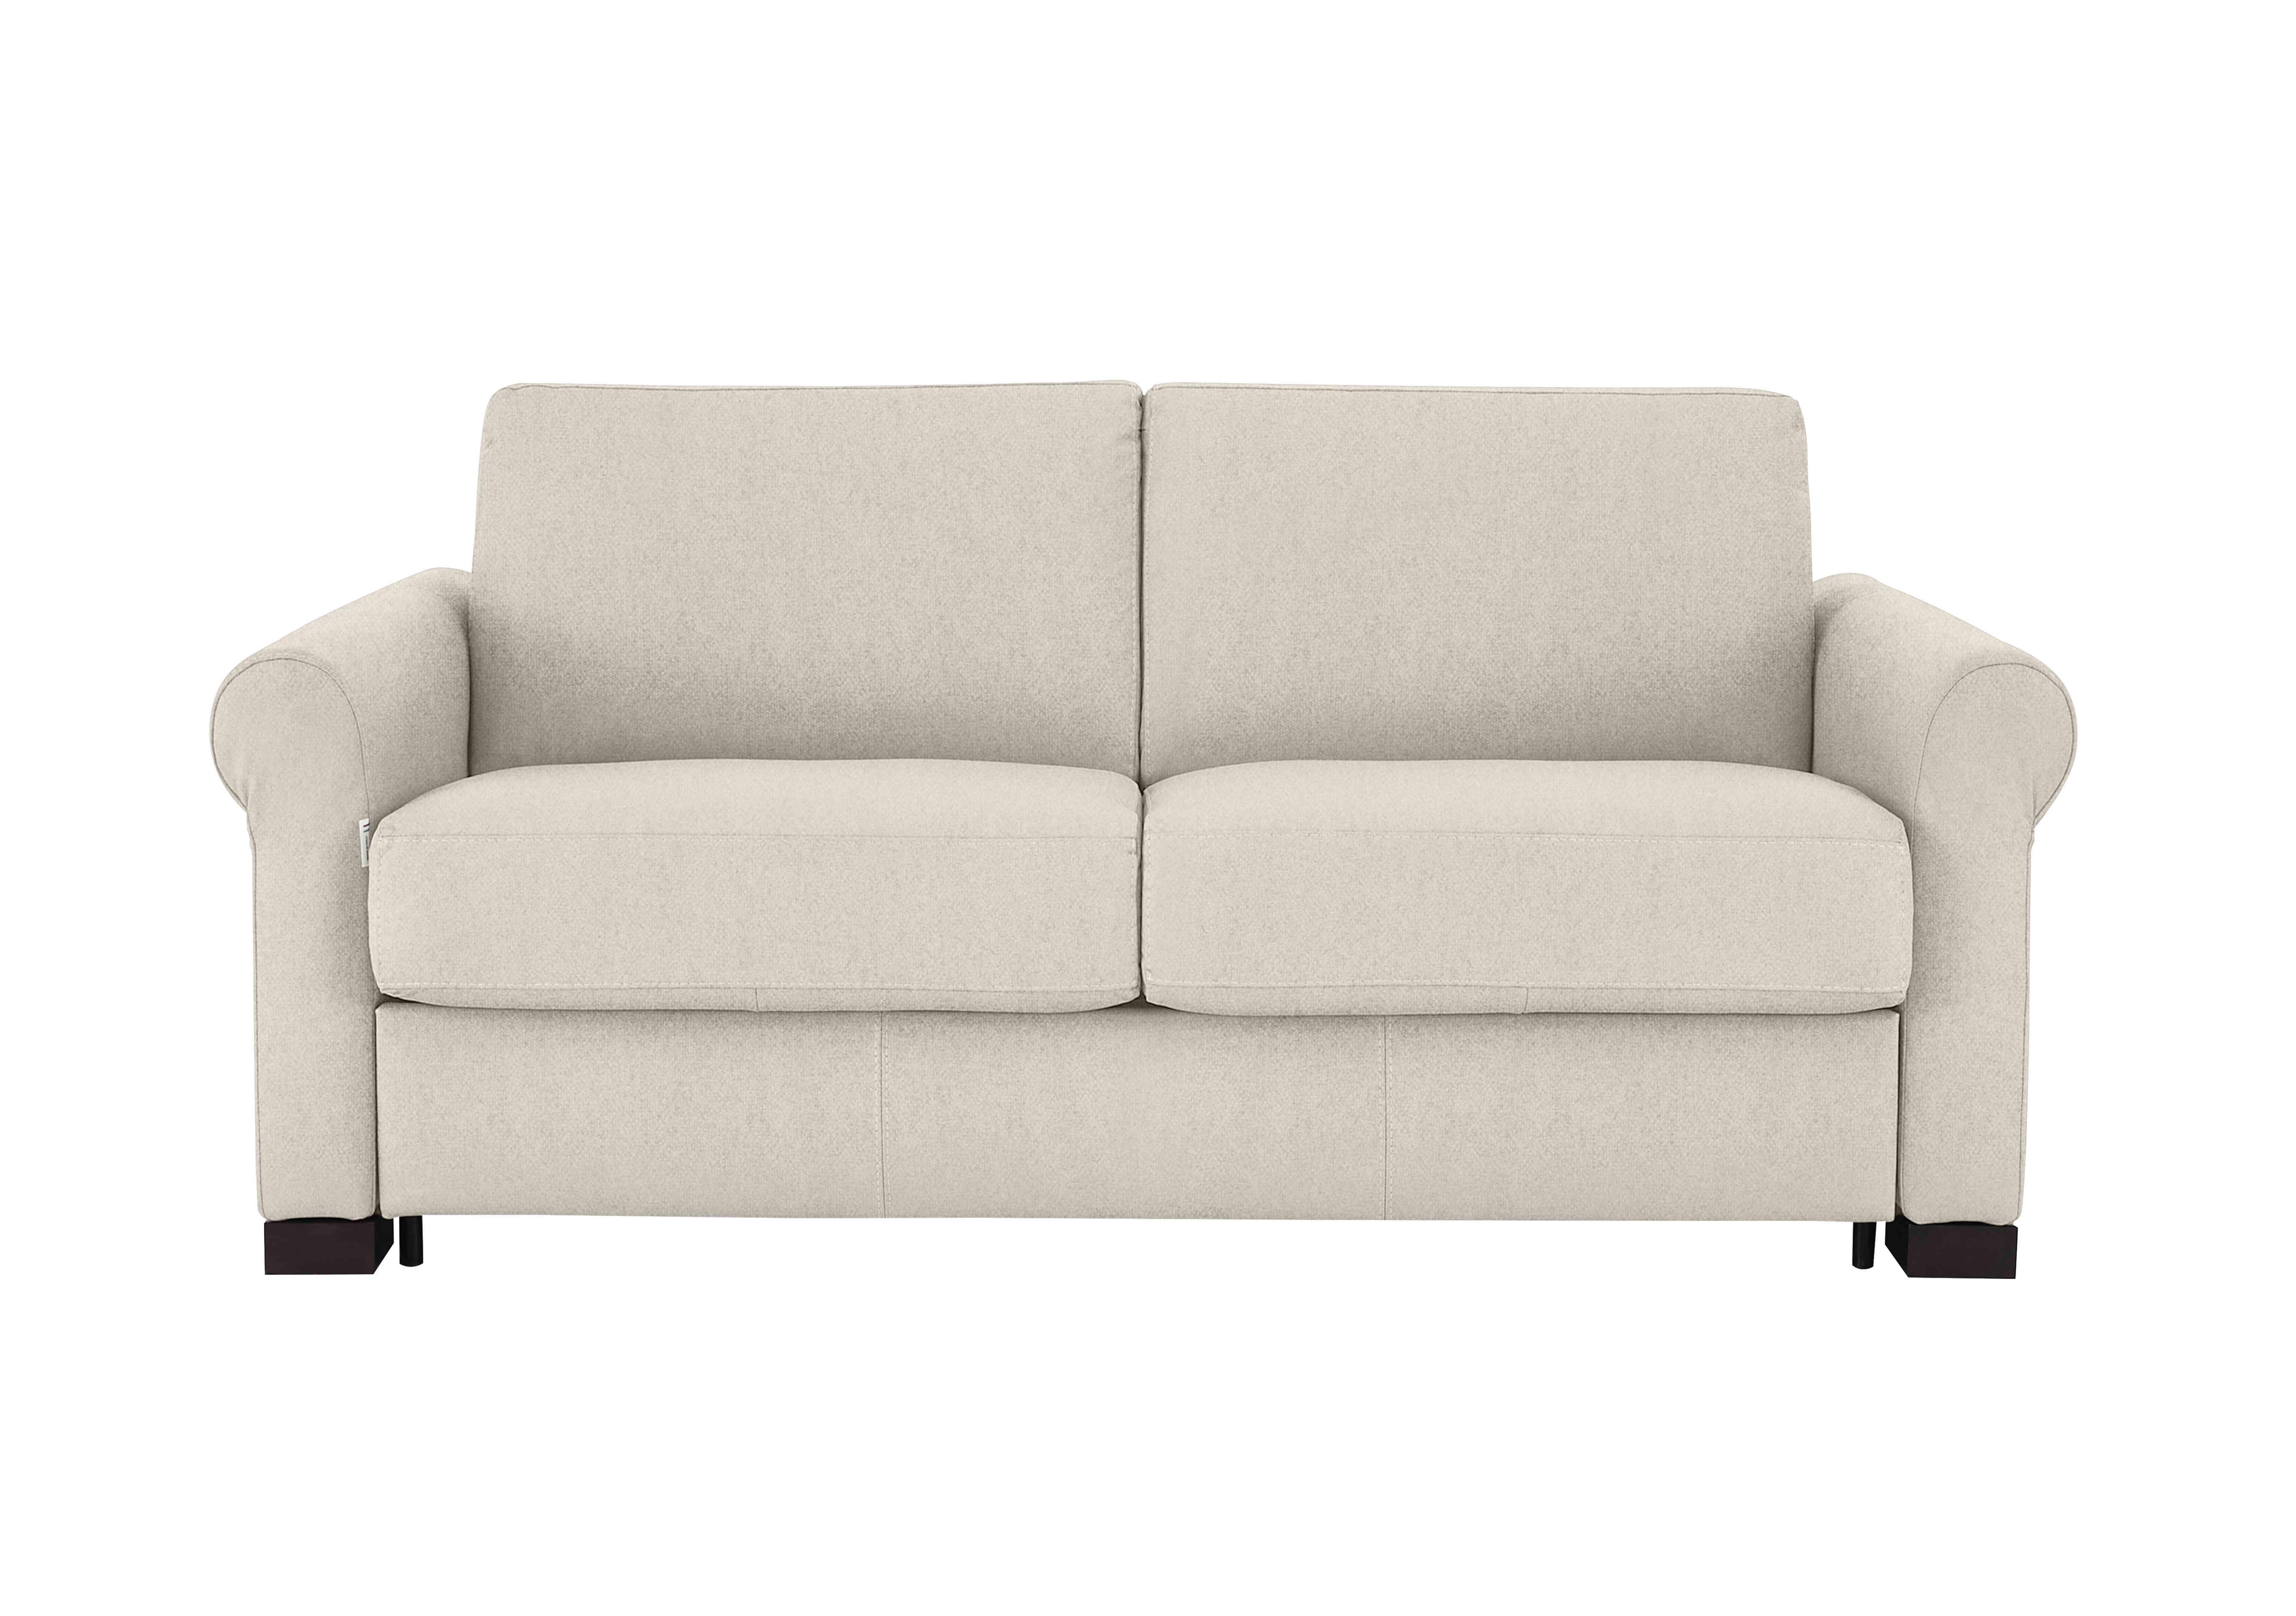 Alcova 2 Seater Fabric Sofa Bed with Scroll Arms in Fuente Beige on Furniture Village